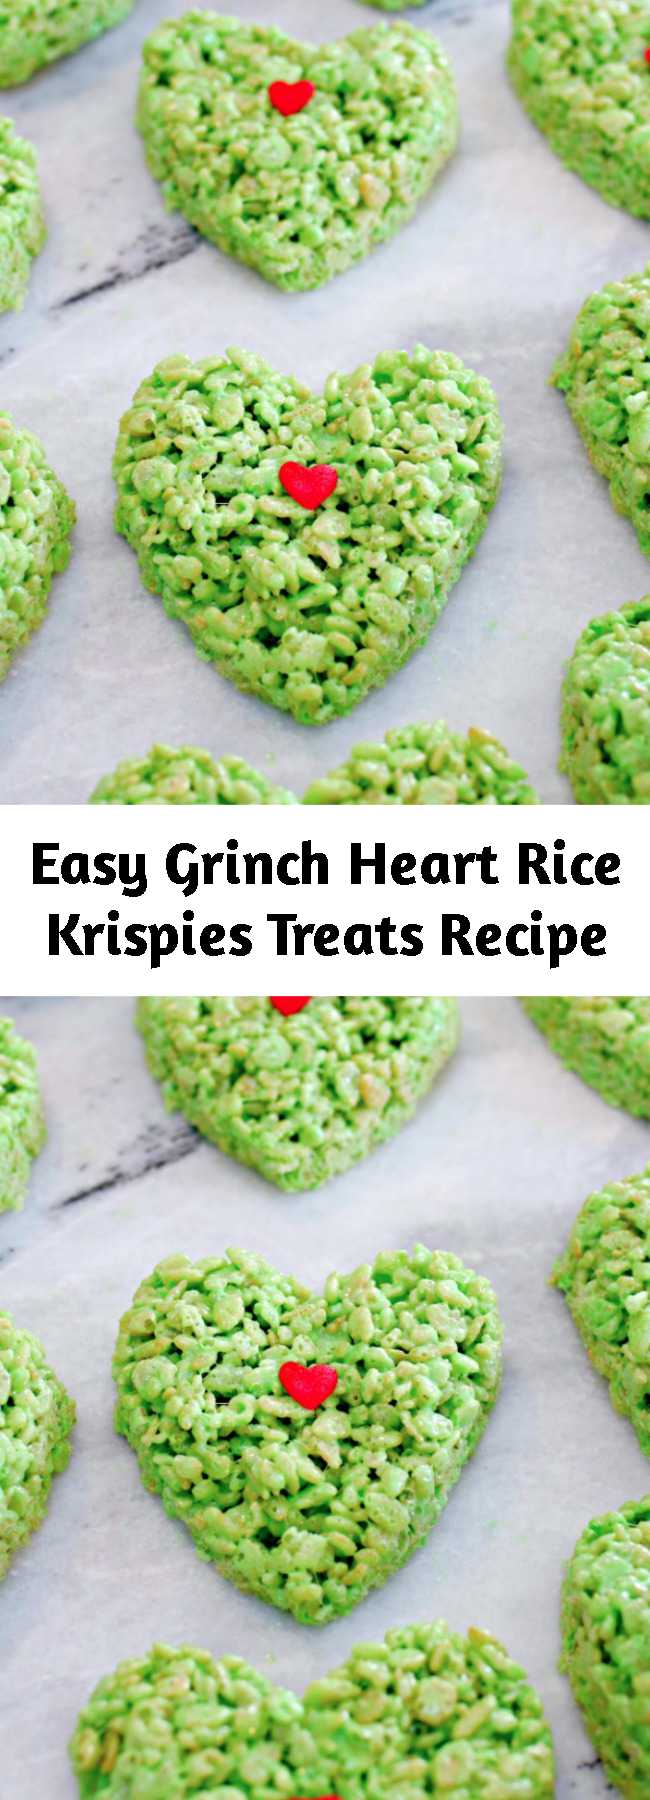 Easy Grinch Heart Rice Krispies Treats Recipe - Homemade Rice Krispie Treats are a favorite in our home, but during Christmas we like to kick them up a notch and make these super cute Grinch Heart Rice Krispies Treats…easiest recipe ever and they are oh so delicious!